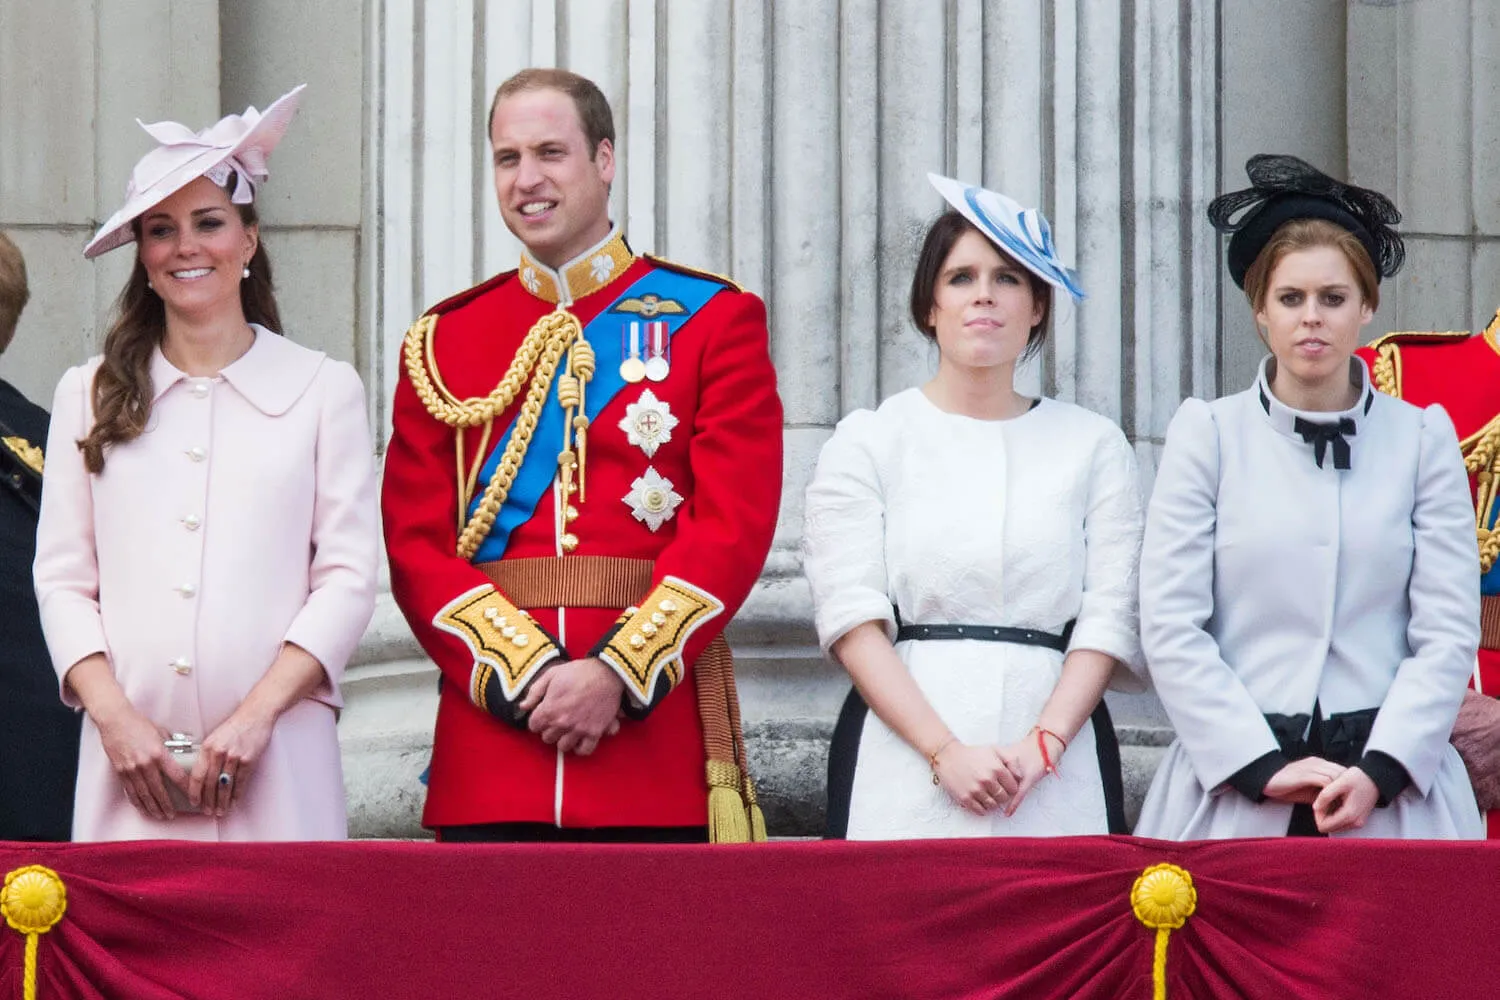 Kate Middleton, Prince William, Princess Eugenie, and Princess Beatrice stand on the balcony during the annual Trooping the Colour Ceremony at Buckingham Palace on June 15, 2013